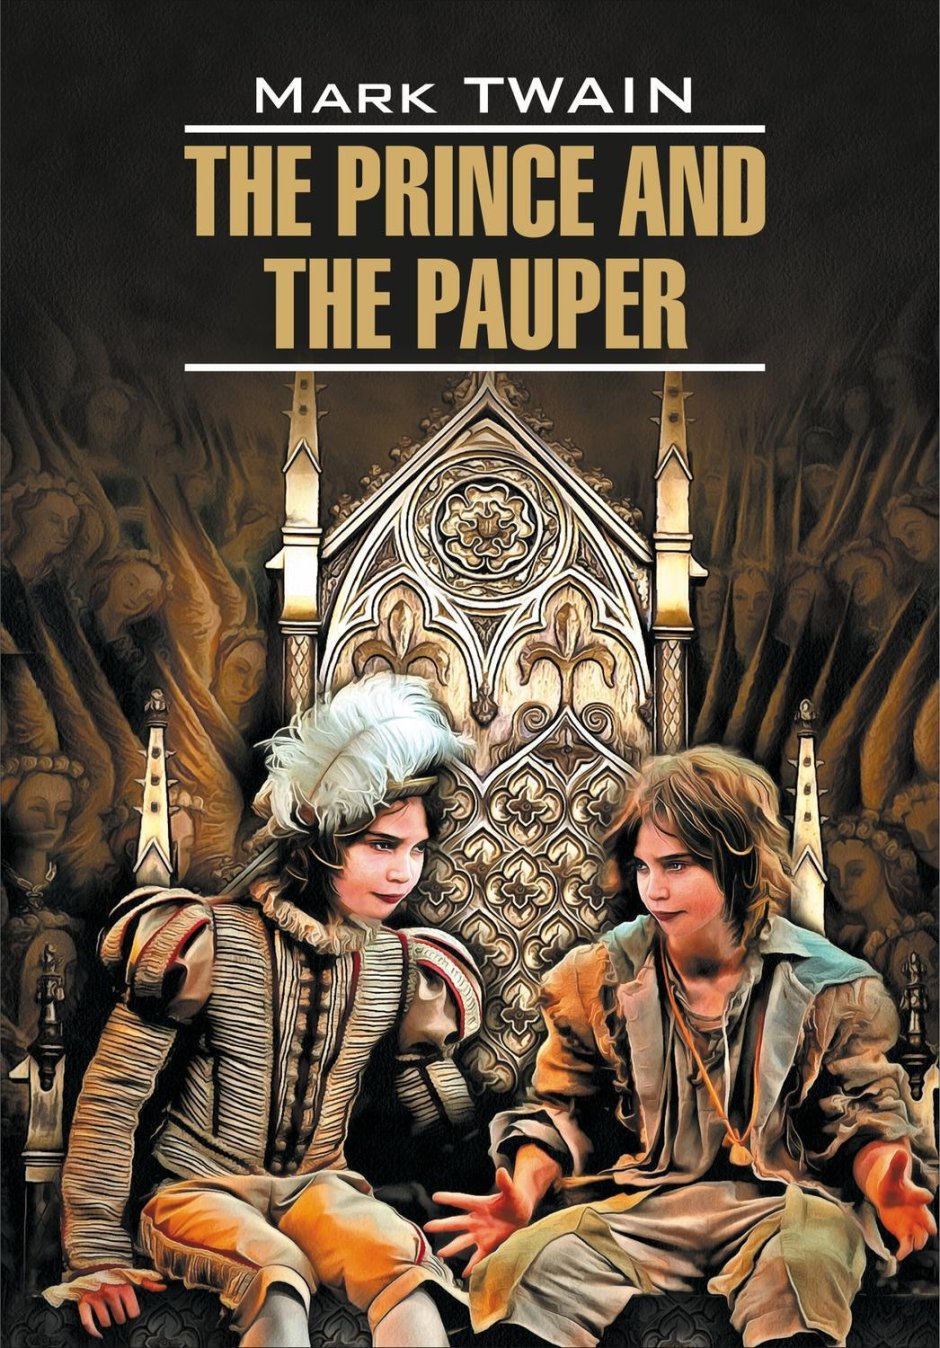 The Prince and the Pauper illustrations